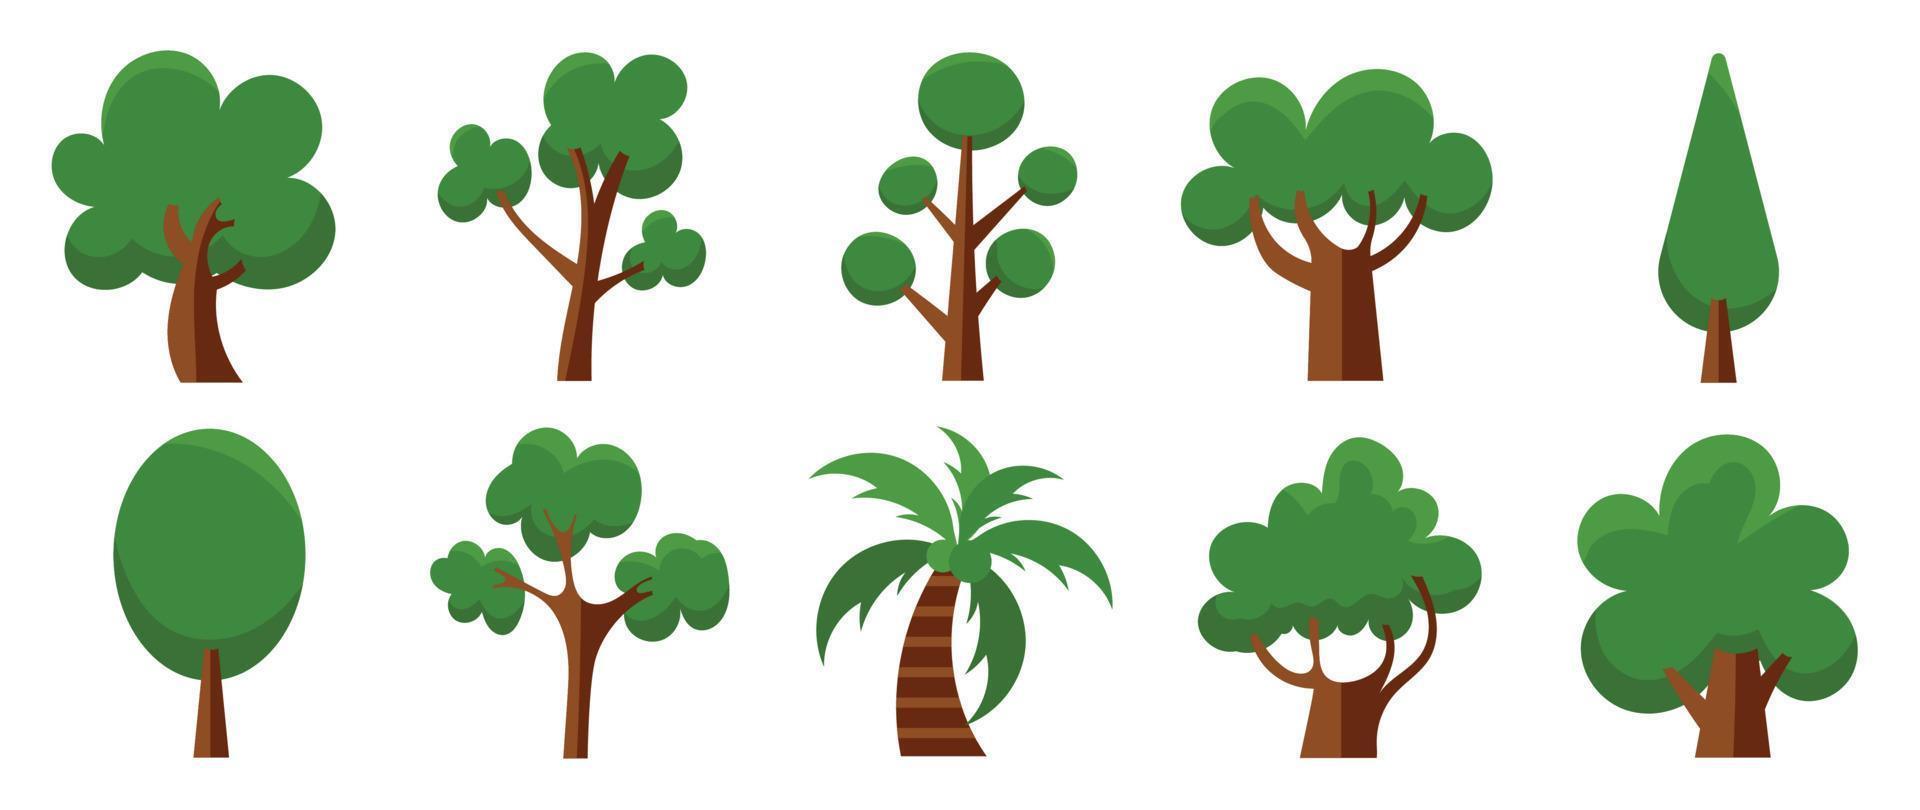 Set of cartoon trees vector. Simple modern style flat forest, jungle, coconut trees, deciduous meadow cute green plants. Design illustration for agricultural garden, nature park, comic landscape. vector